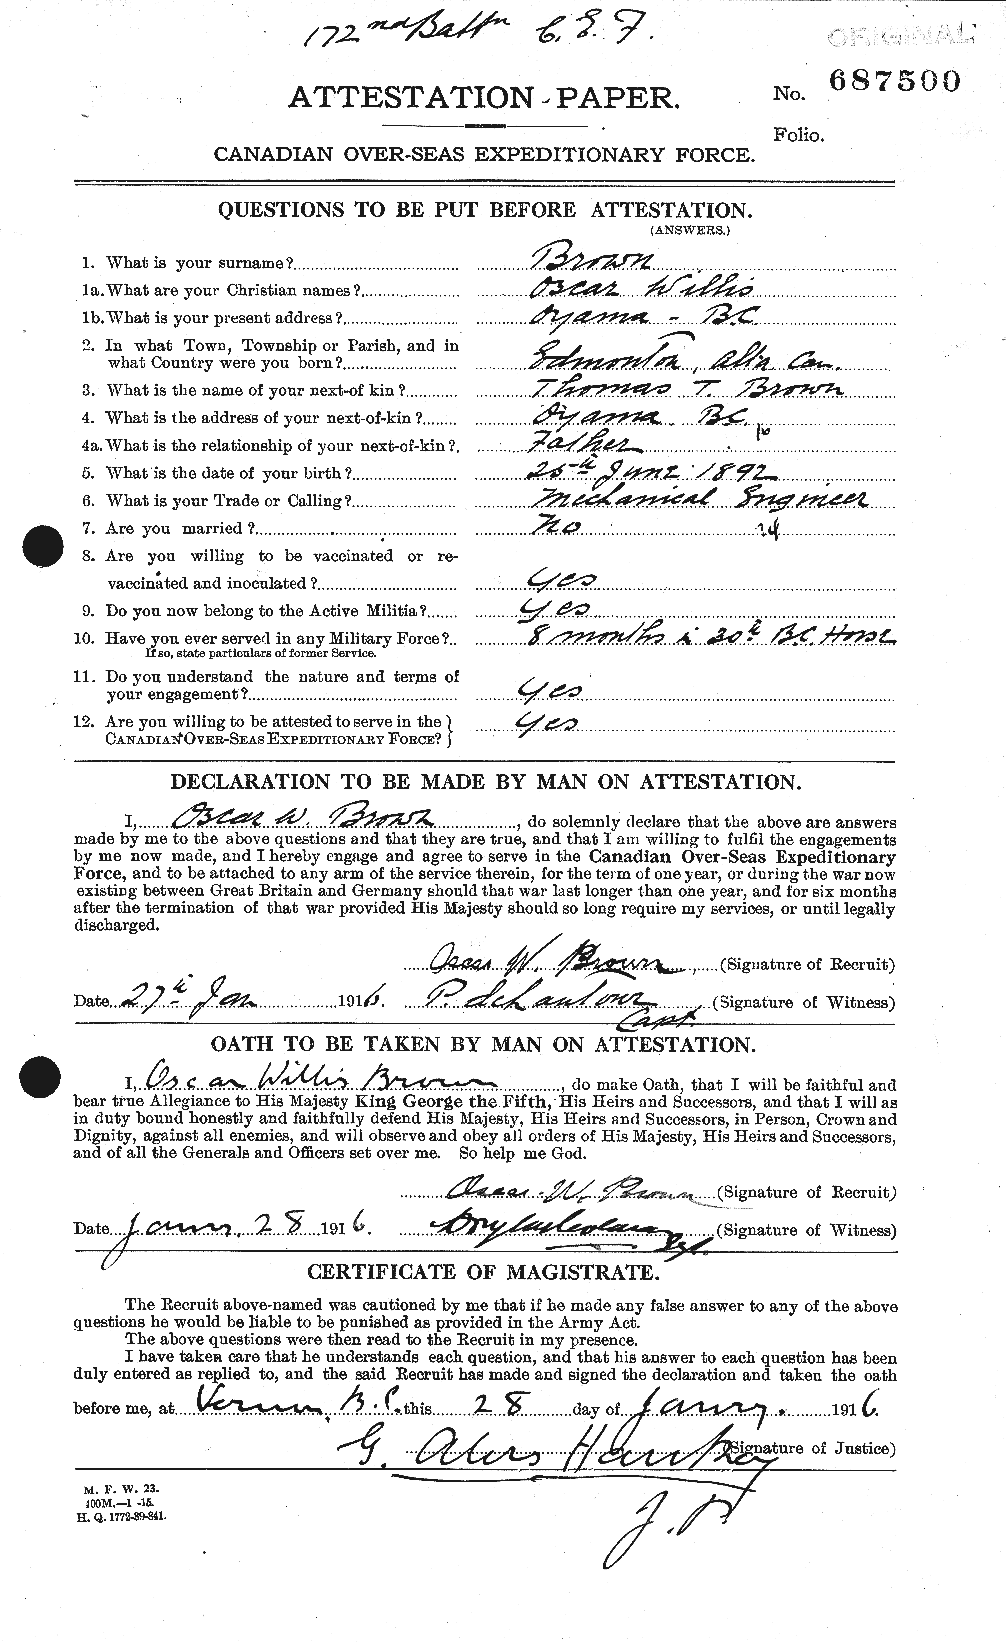 Personnel Records of the First World War - CEF 267139a